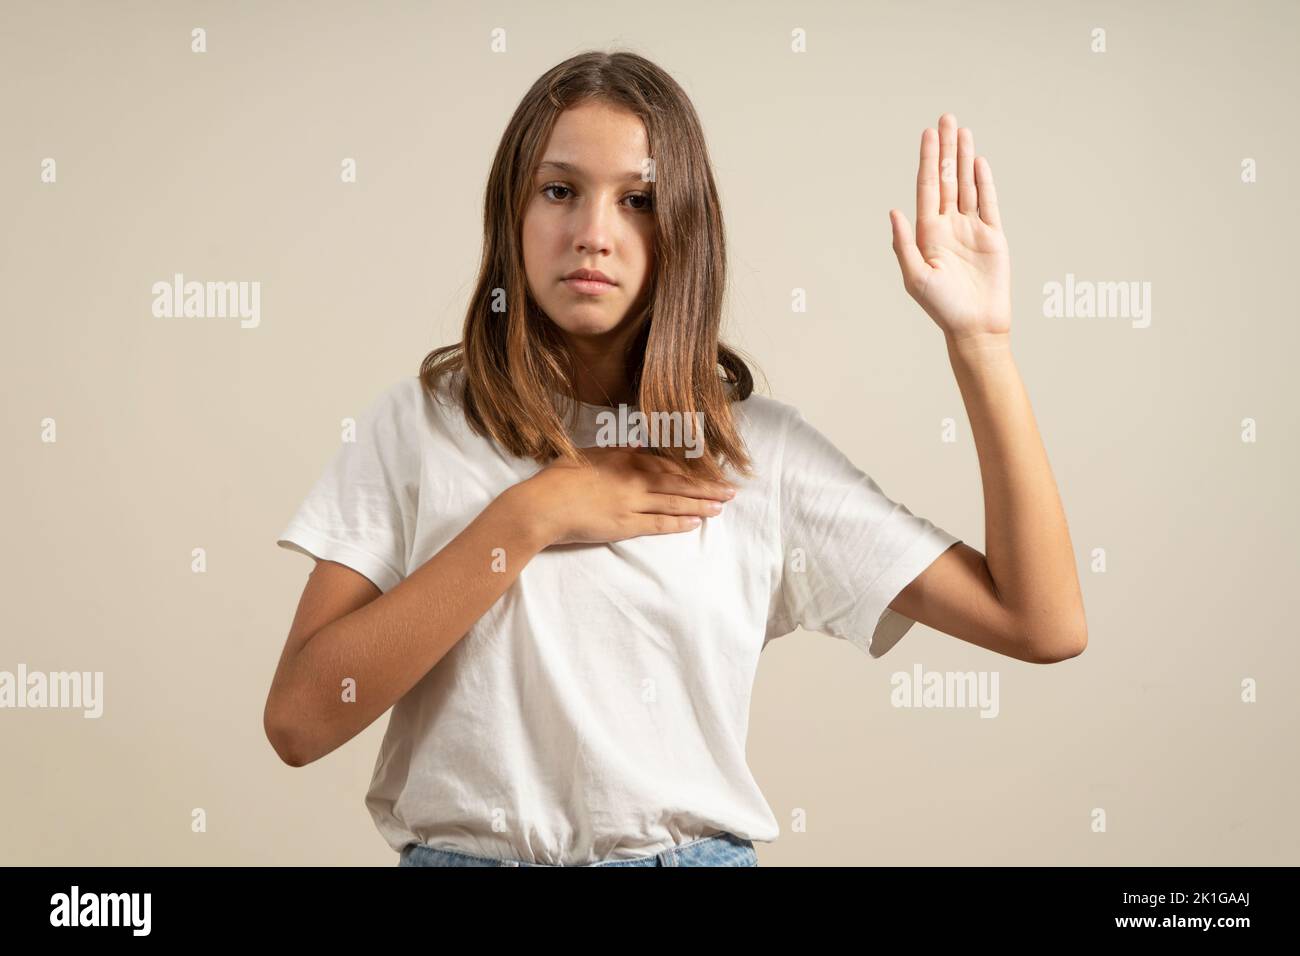 Young brunette hispanic teenager standing together over isolated beige background swearing with hand on chest and open palm, making a loyalty promise Stock Photo